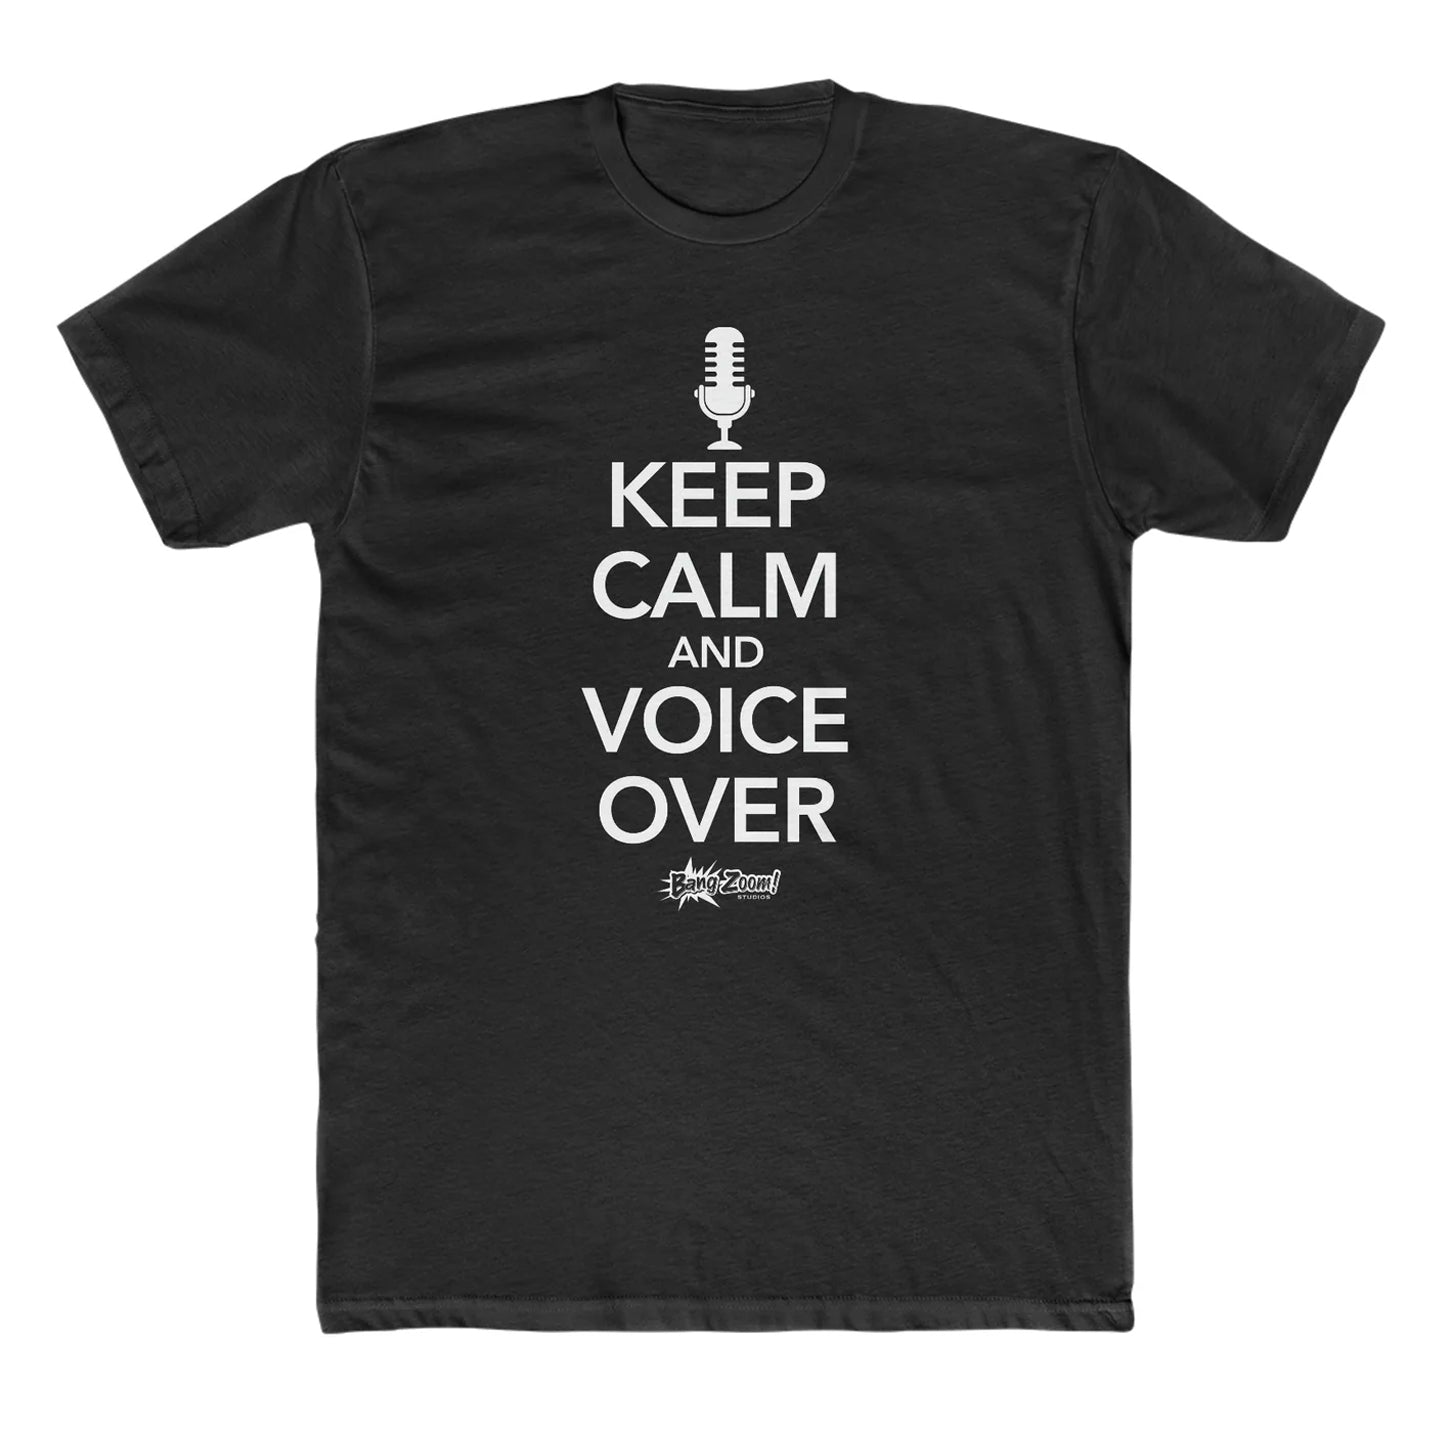 Unisex "Keep Calm and Voice Over" Black Tee